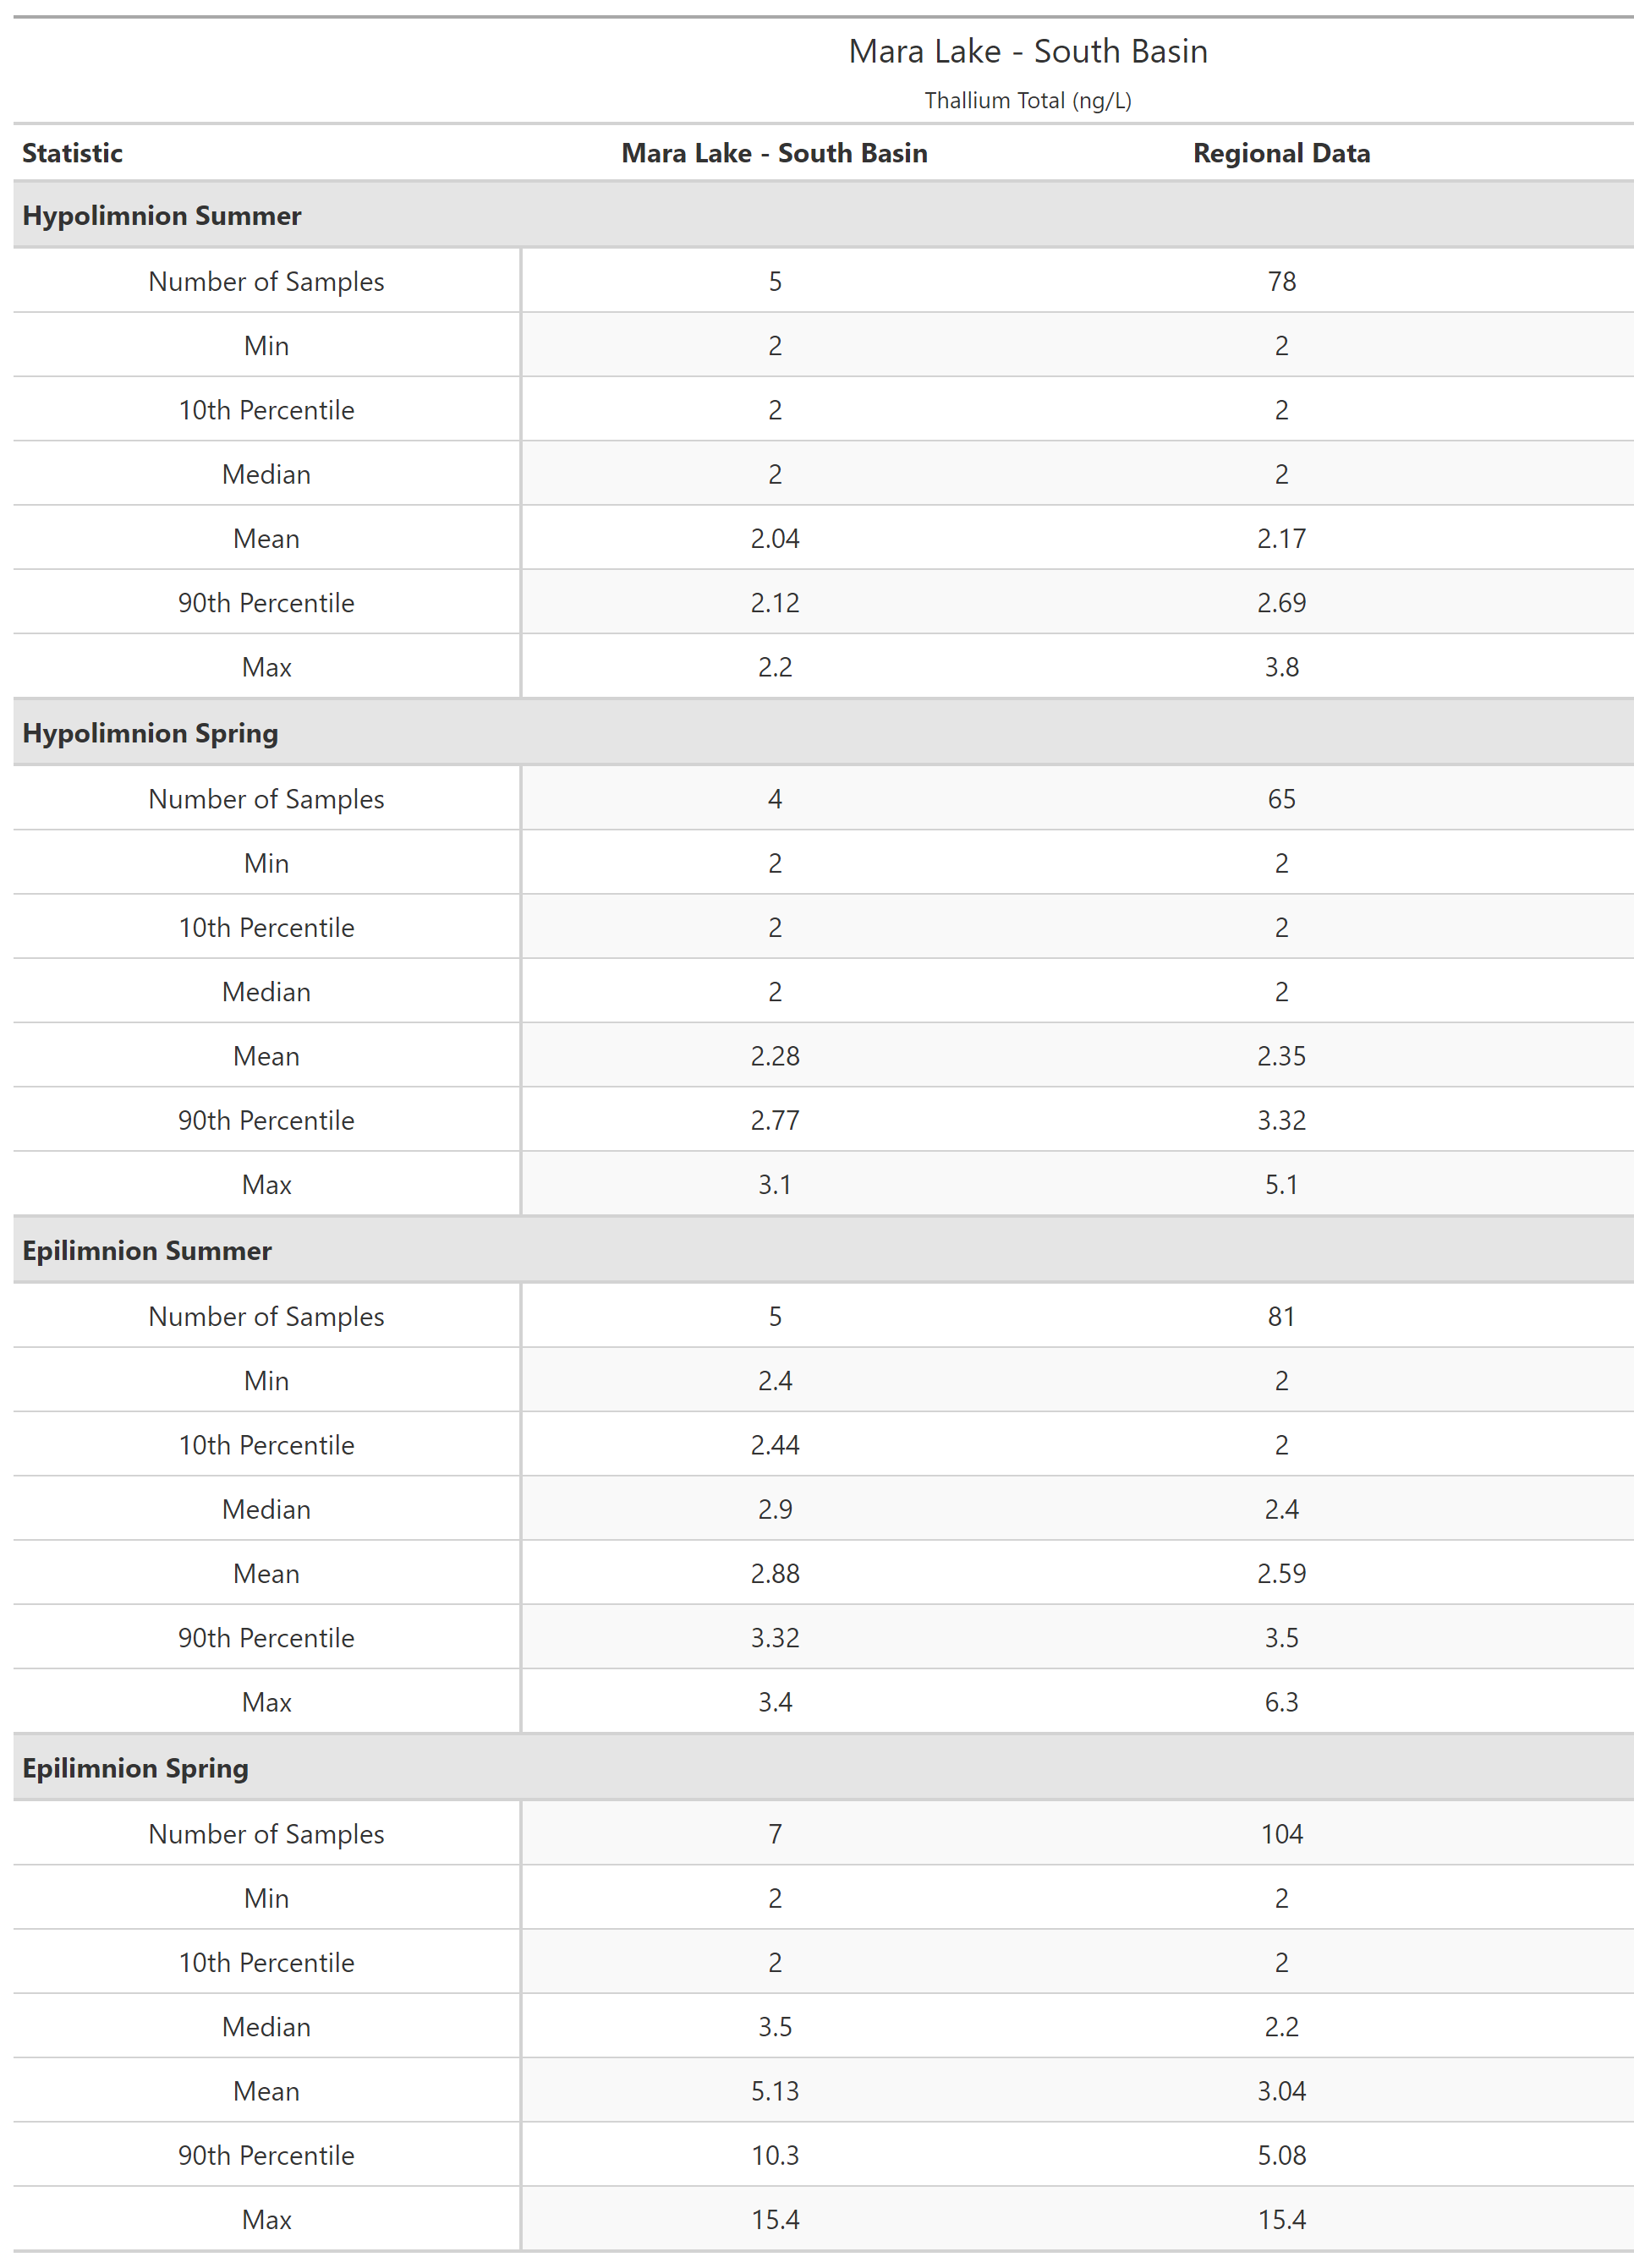 A table of summary statistics for Thallium Total with comparison to regional data